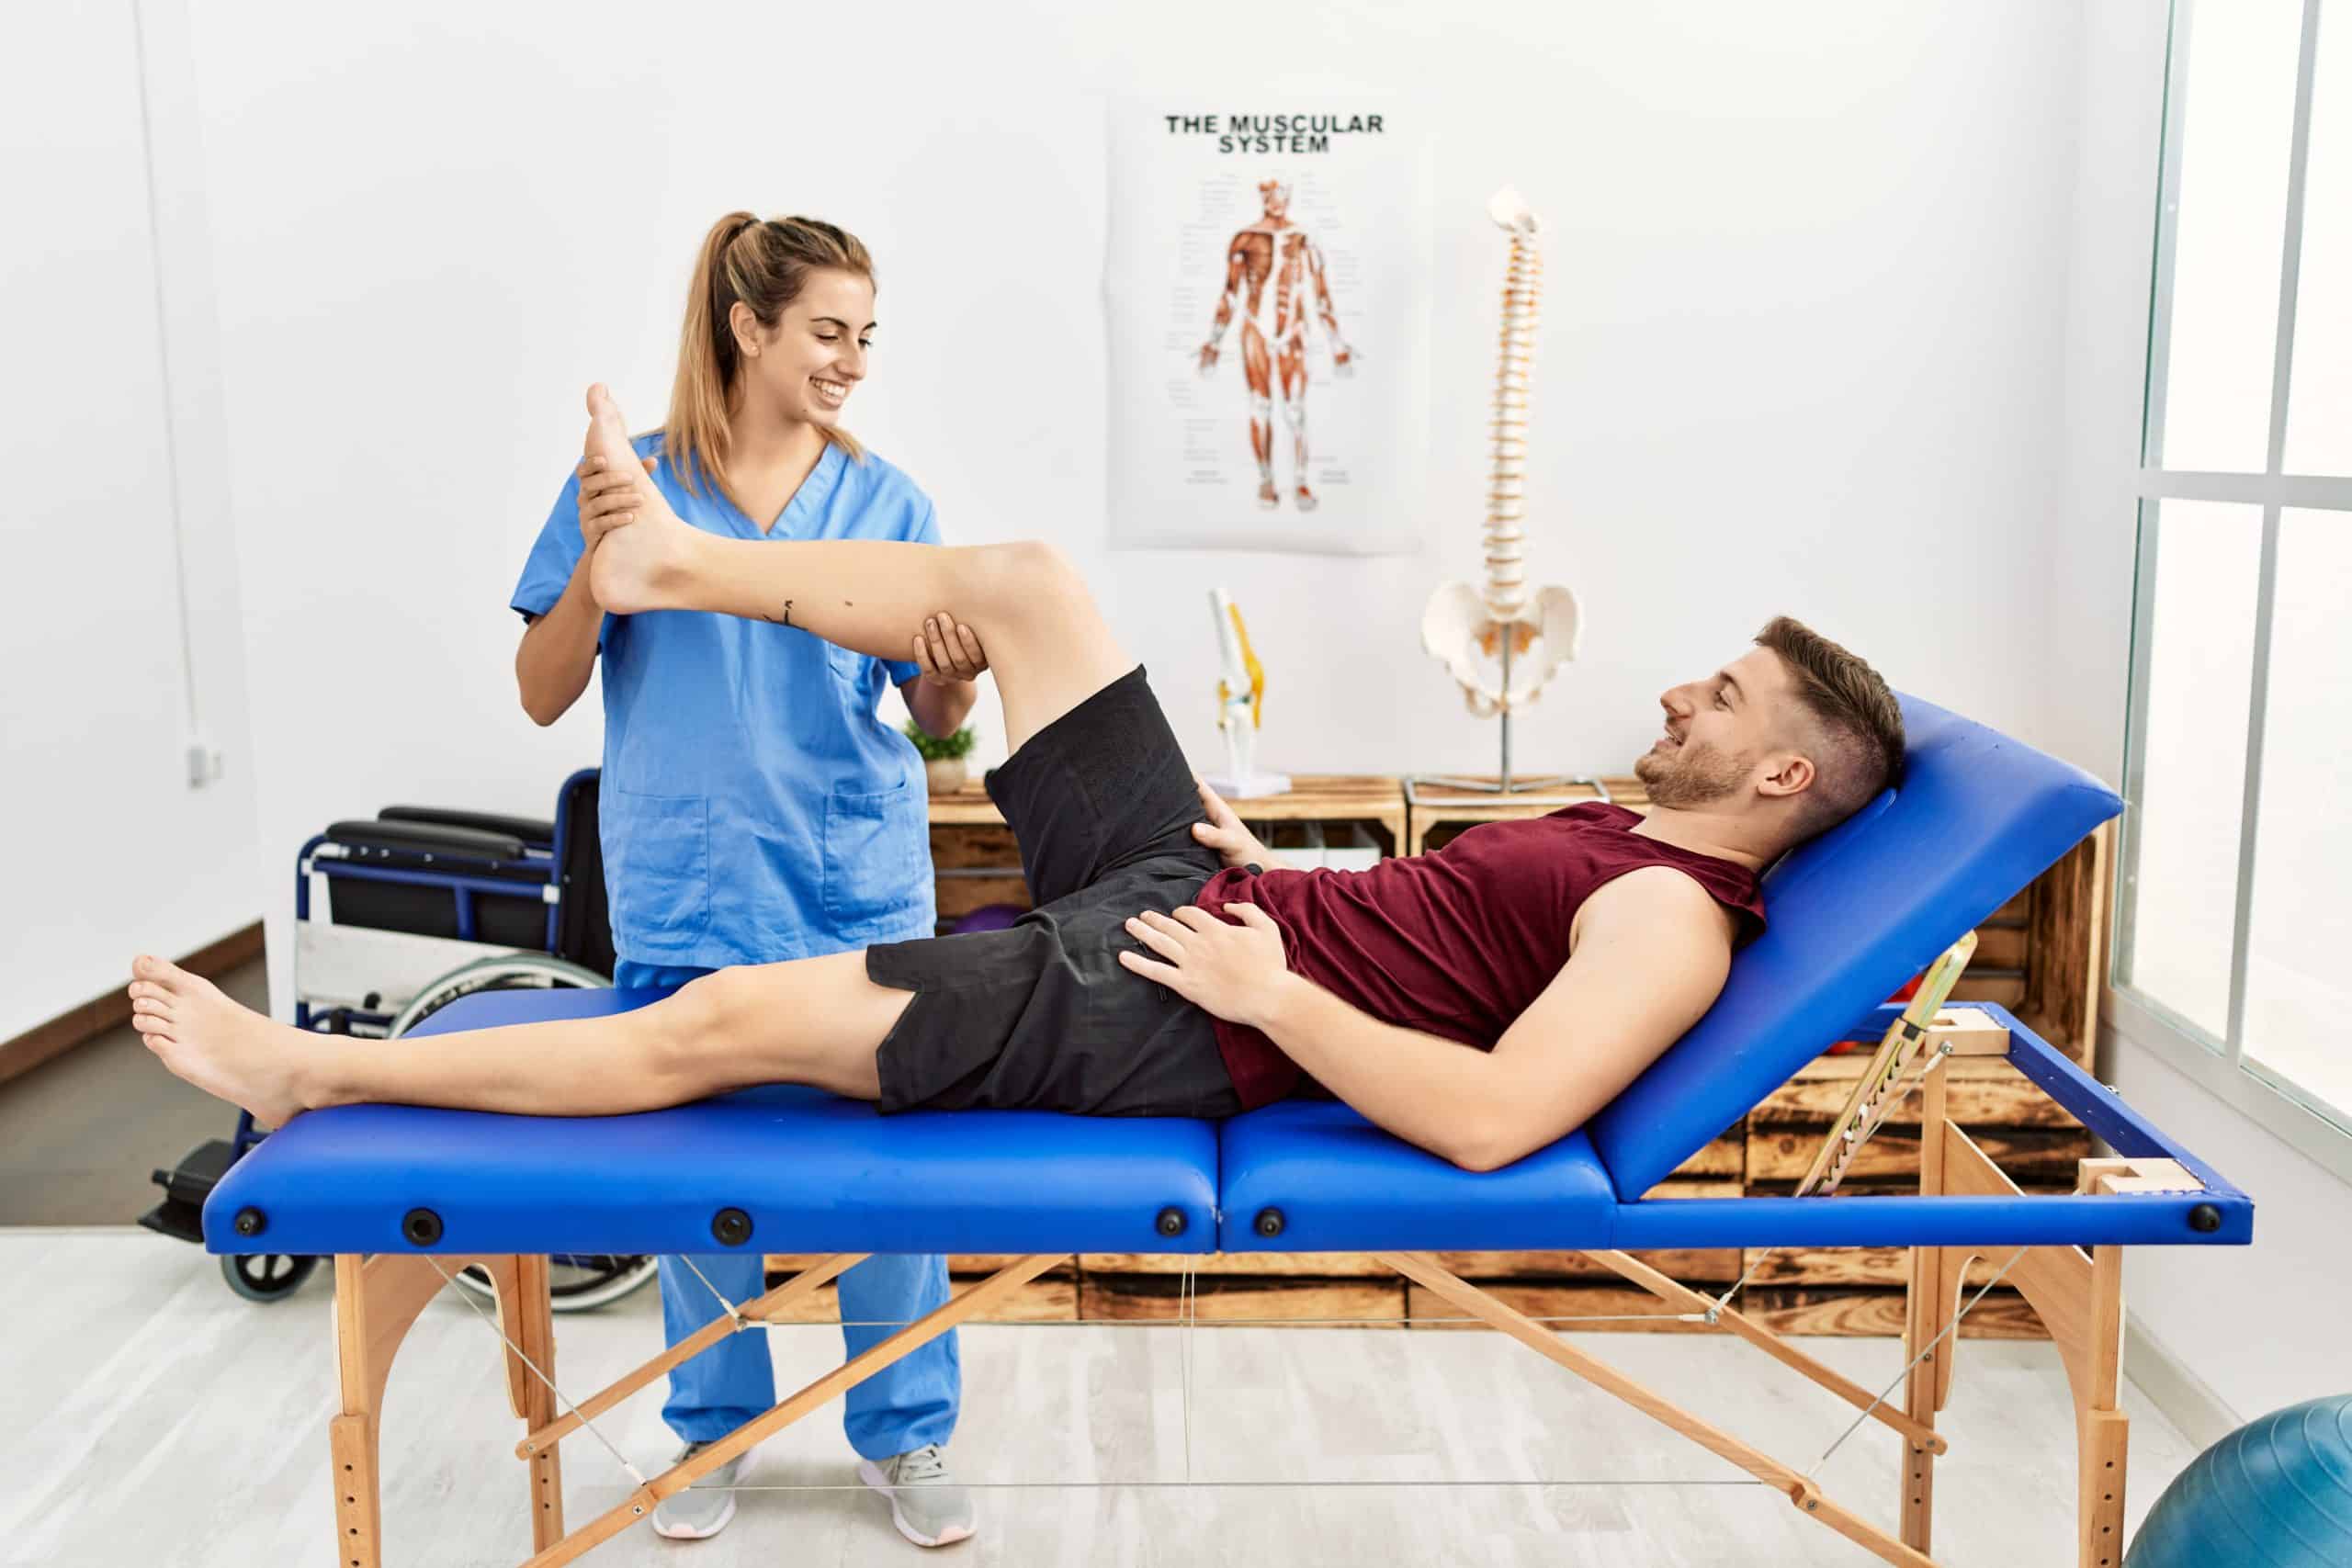 10 Valuable Guidelines For Choosing a Physical Therapy Treatment Table